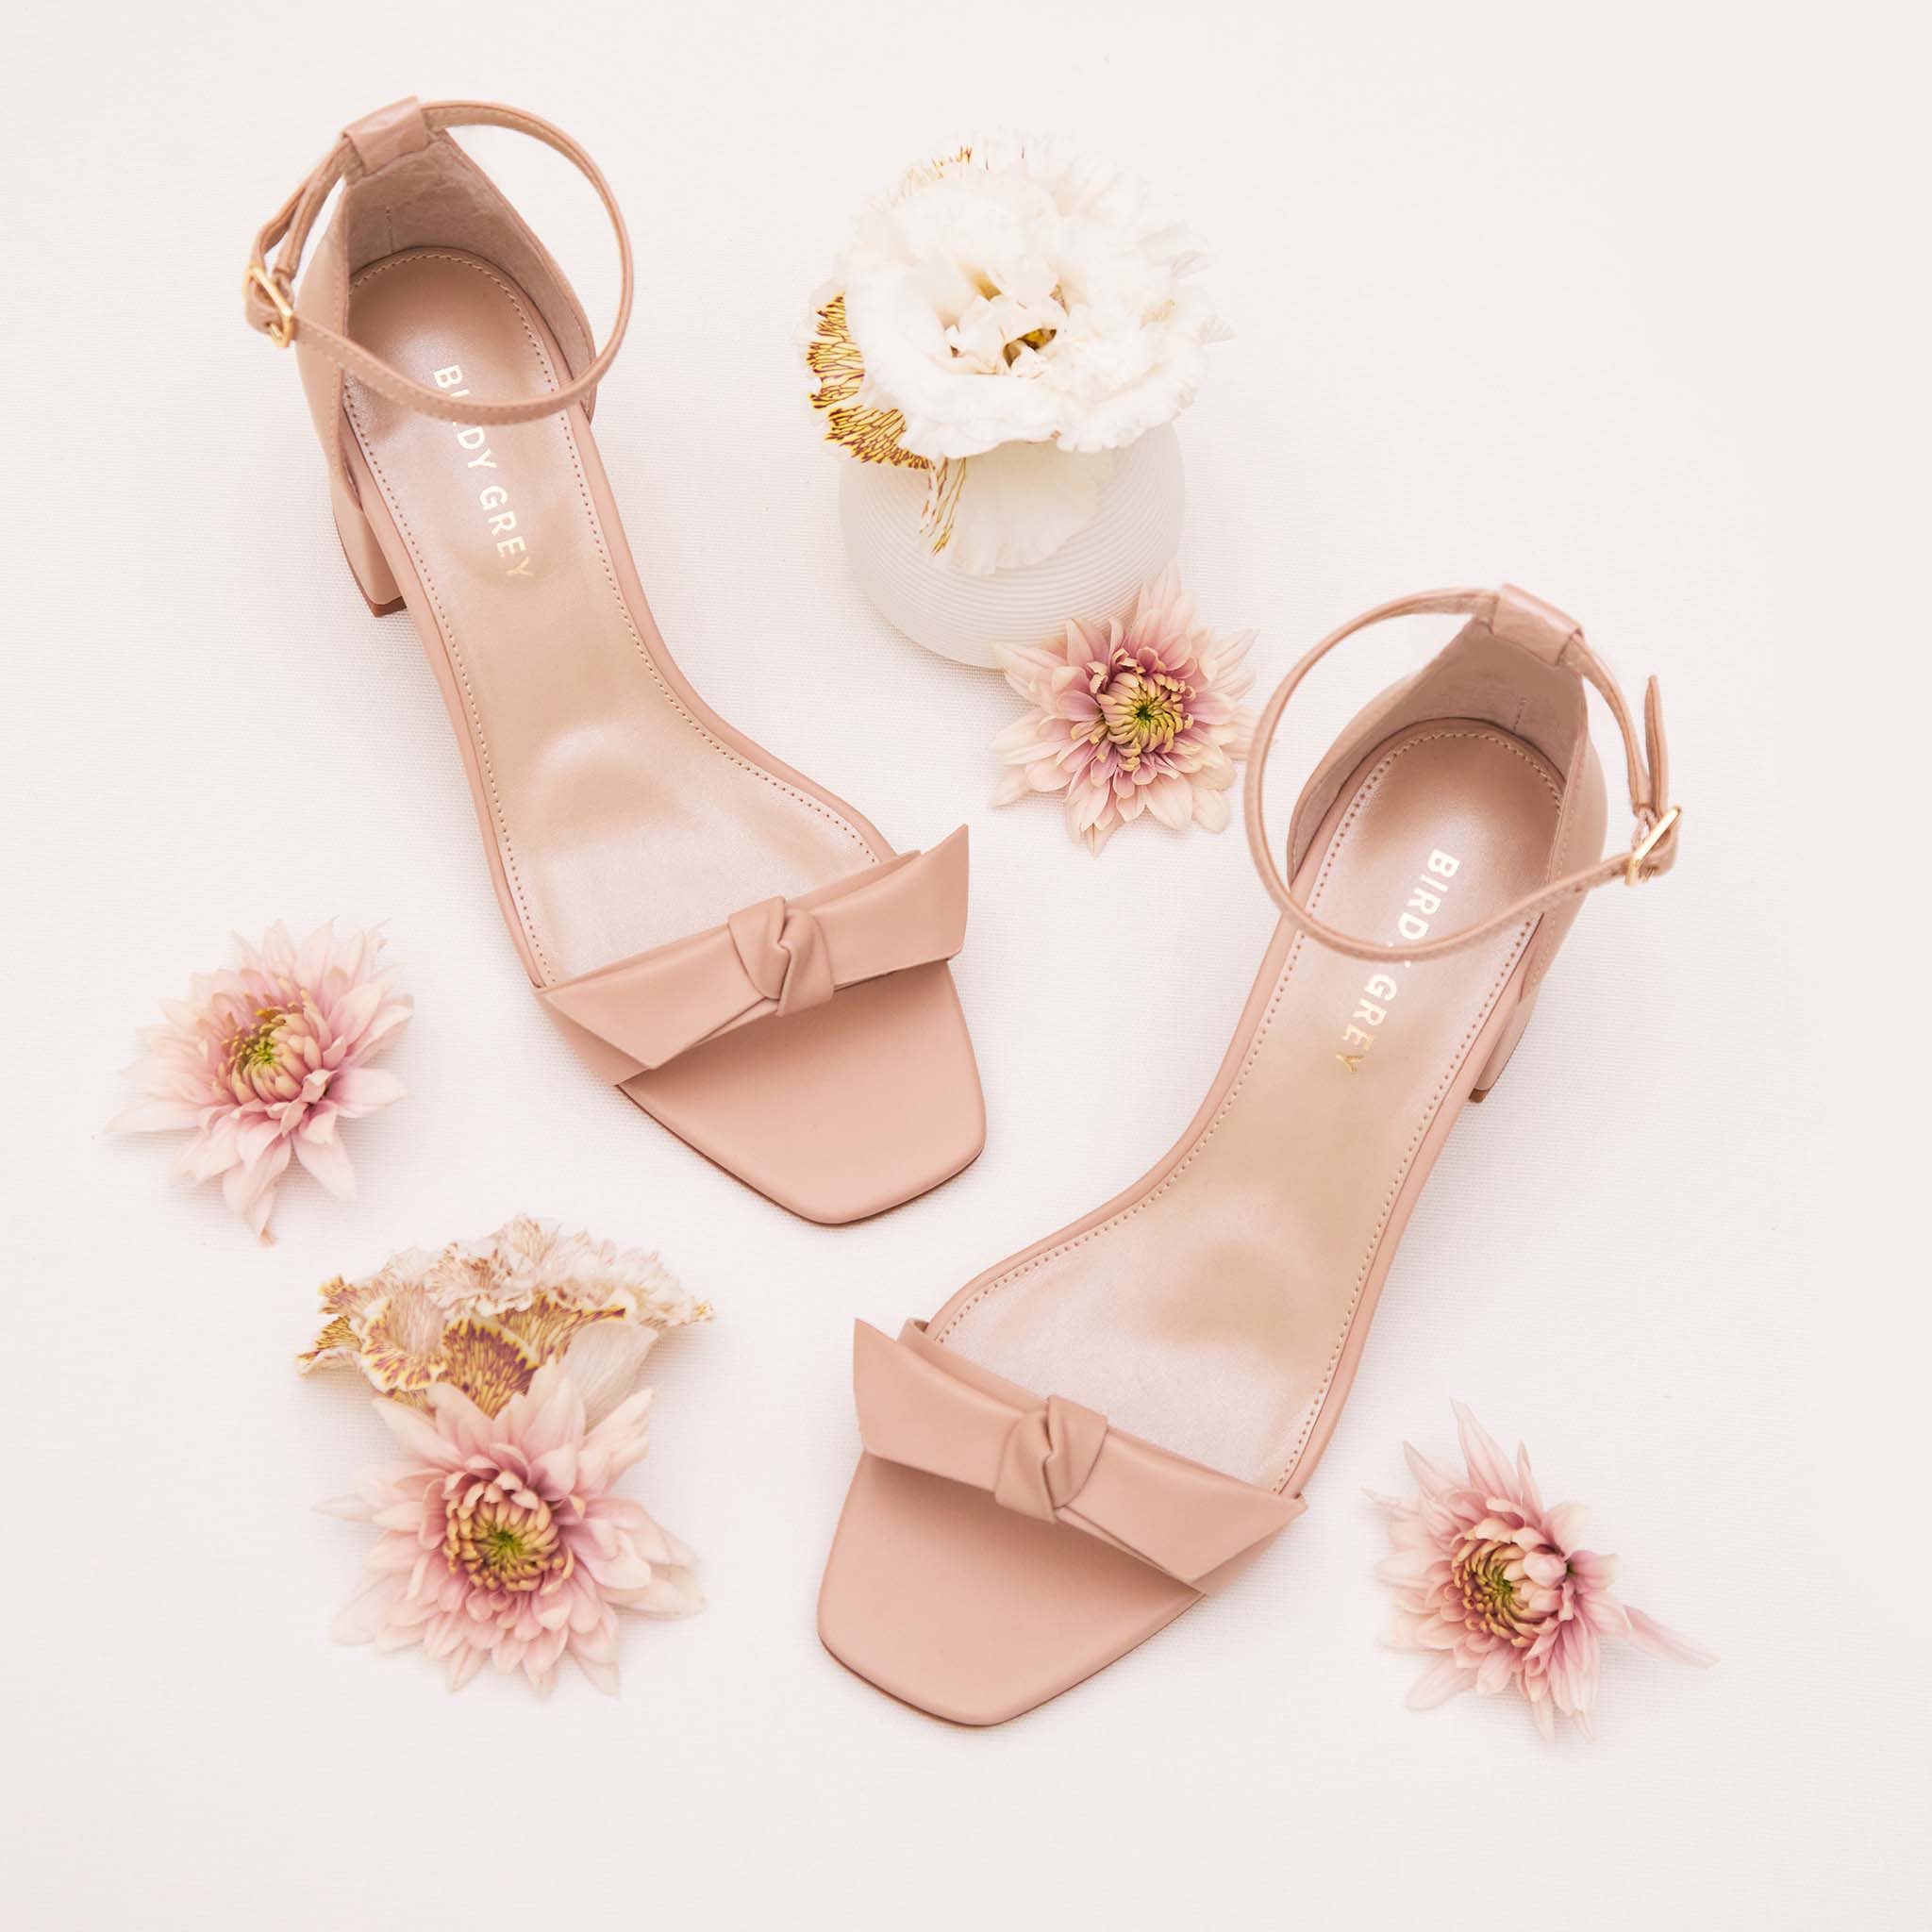 Elle Chunky Heel in Nude Blush by Birdy Grey, top view